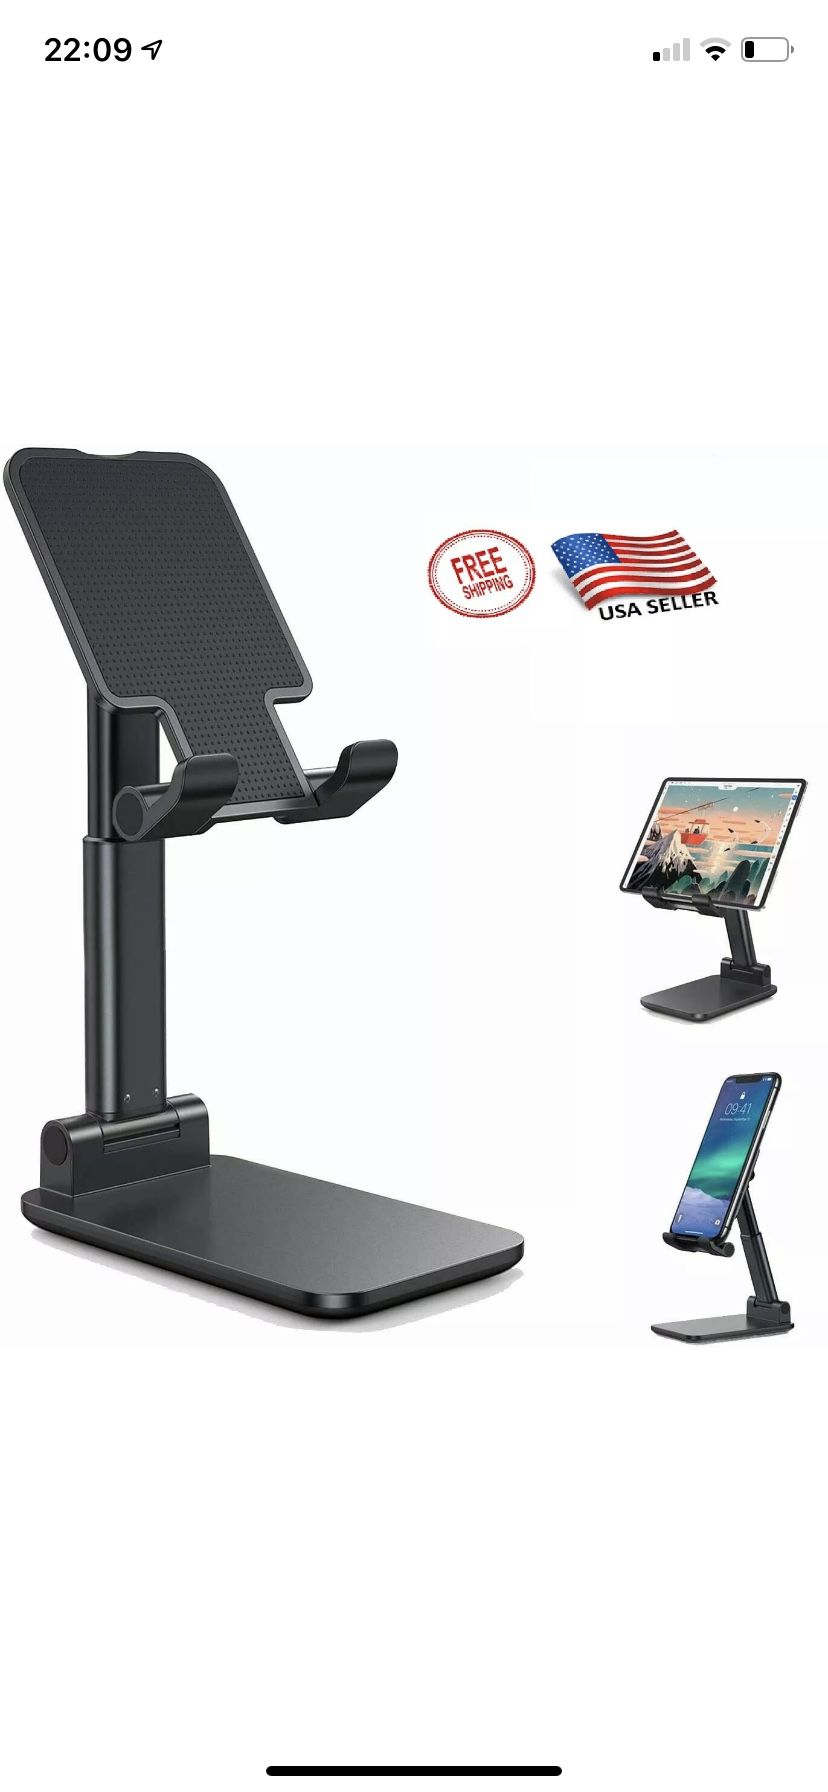 Adjustable Cell Phone Stand Holder Desk Dock Mount For iPad iPhone Kindle Tablet